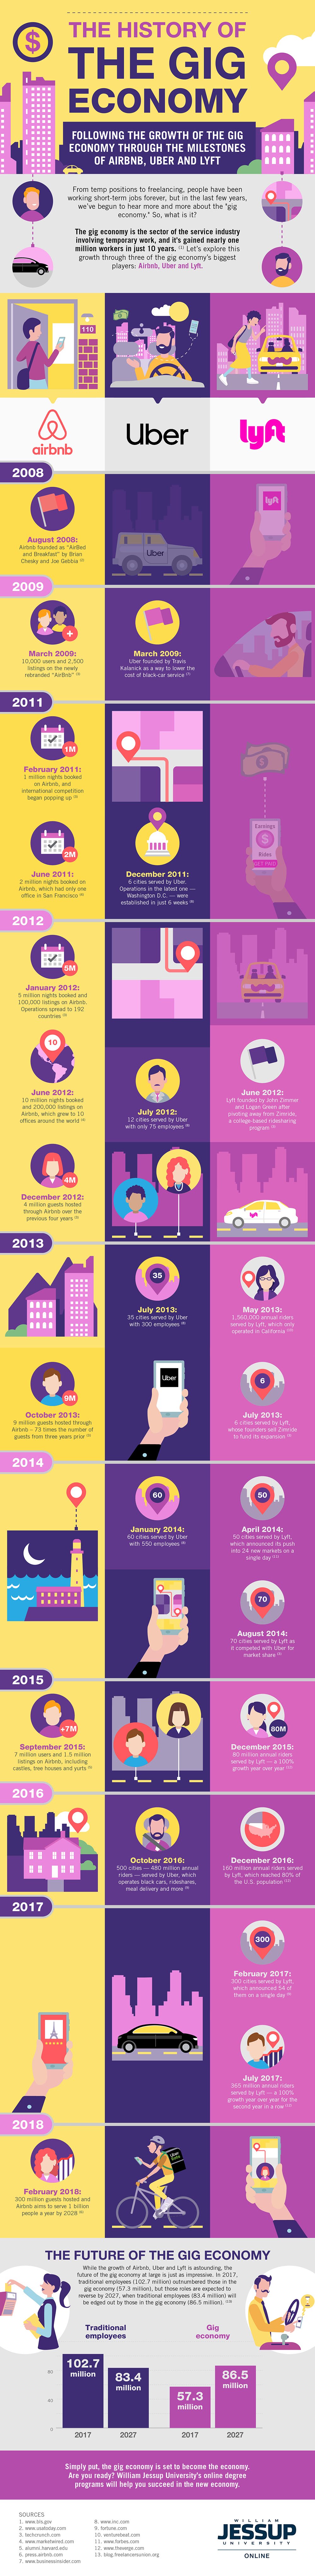 The History of The Gig Economy